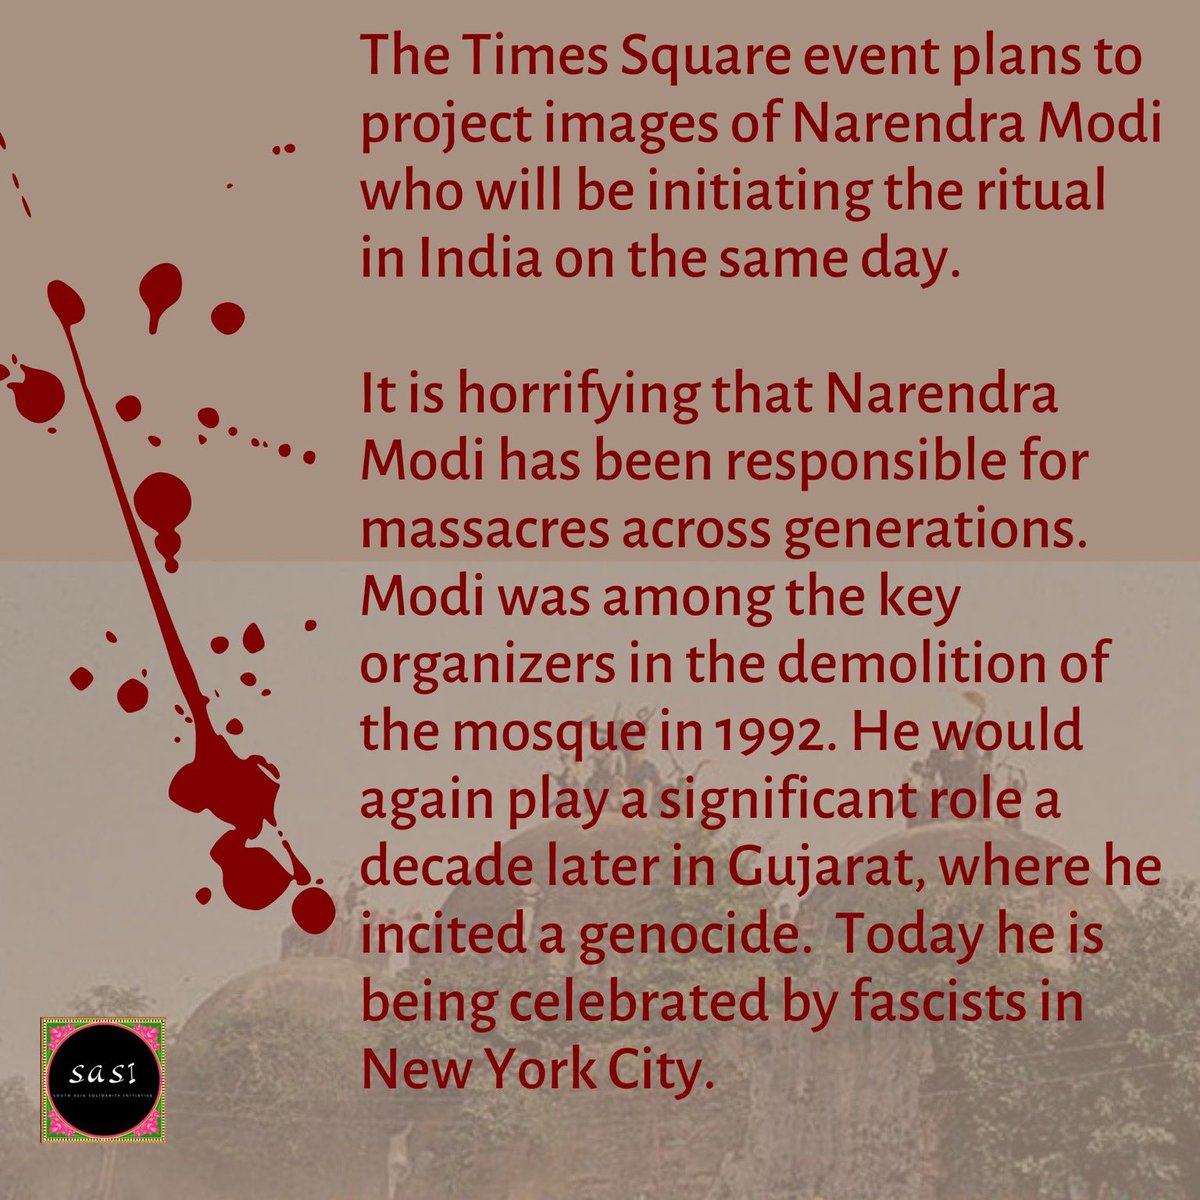 On the Vishwa Hindu Parishad, its role in the Babri Masjid demolition and killings, and its direct link to Modi who himself has orchestrated multiple massacres. The diaspora has always fueled this genocidal regime, but it’s time to turn the tide and say no to hindu nationalism!